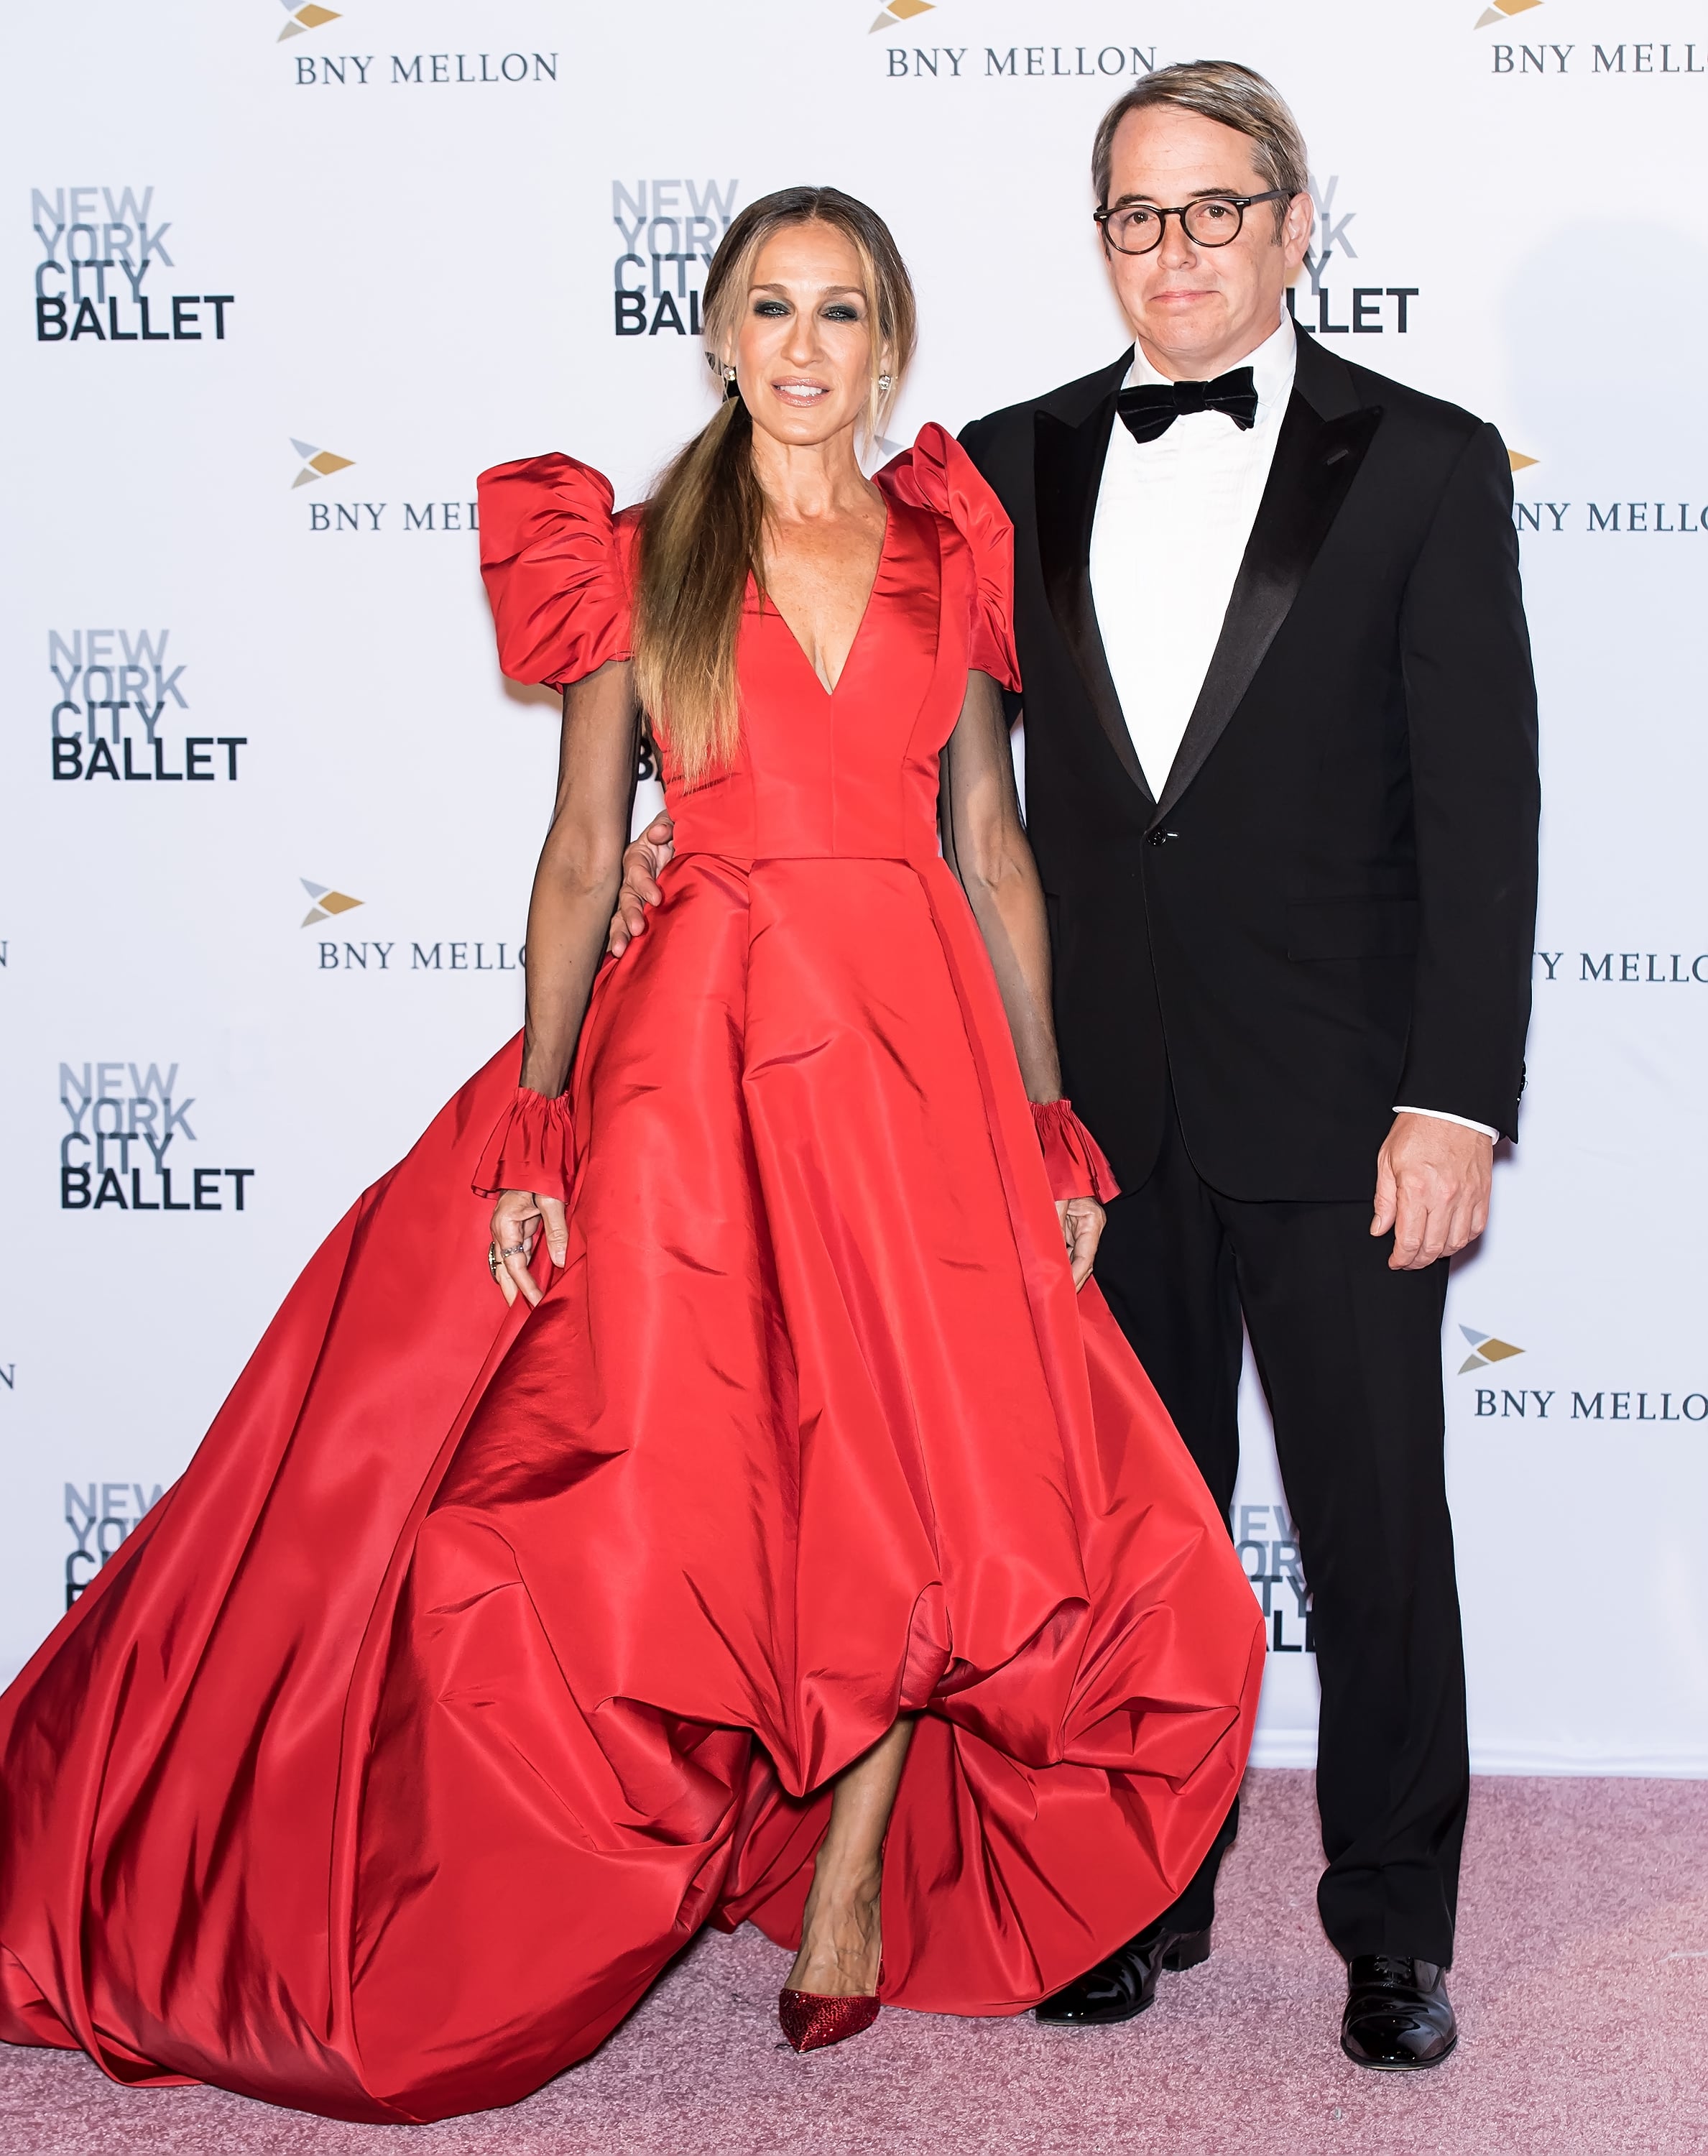 Sarah Jessica Parker and Matthew Broderick Hit Red Carpet with 3 Kids